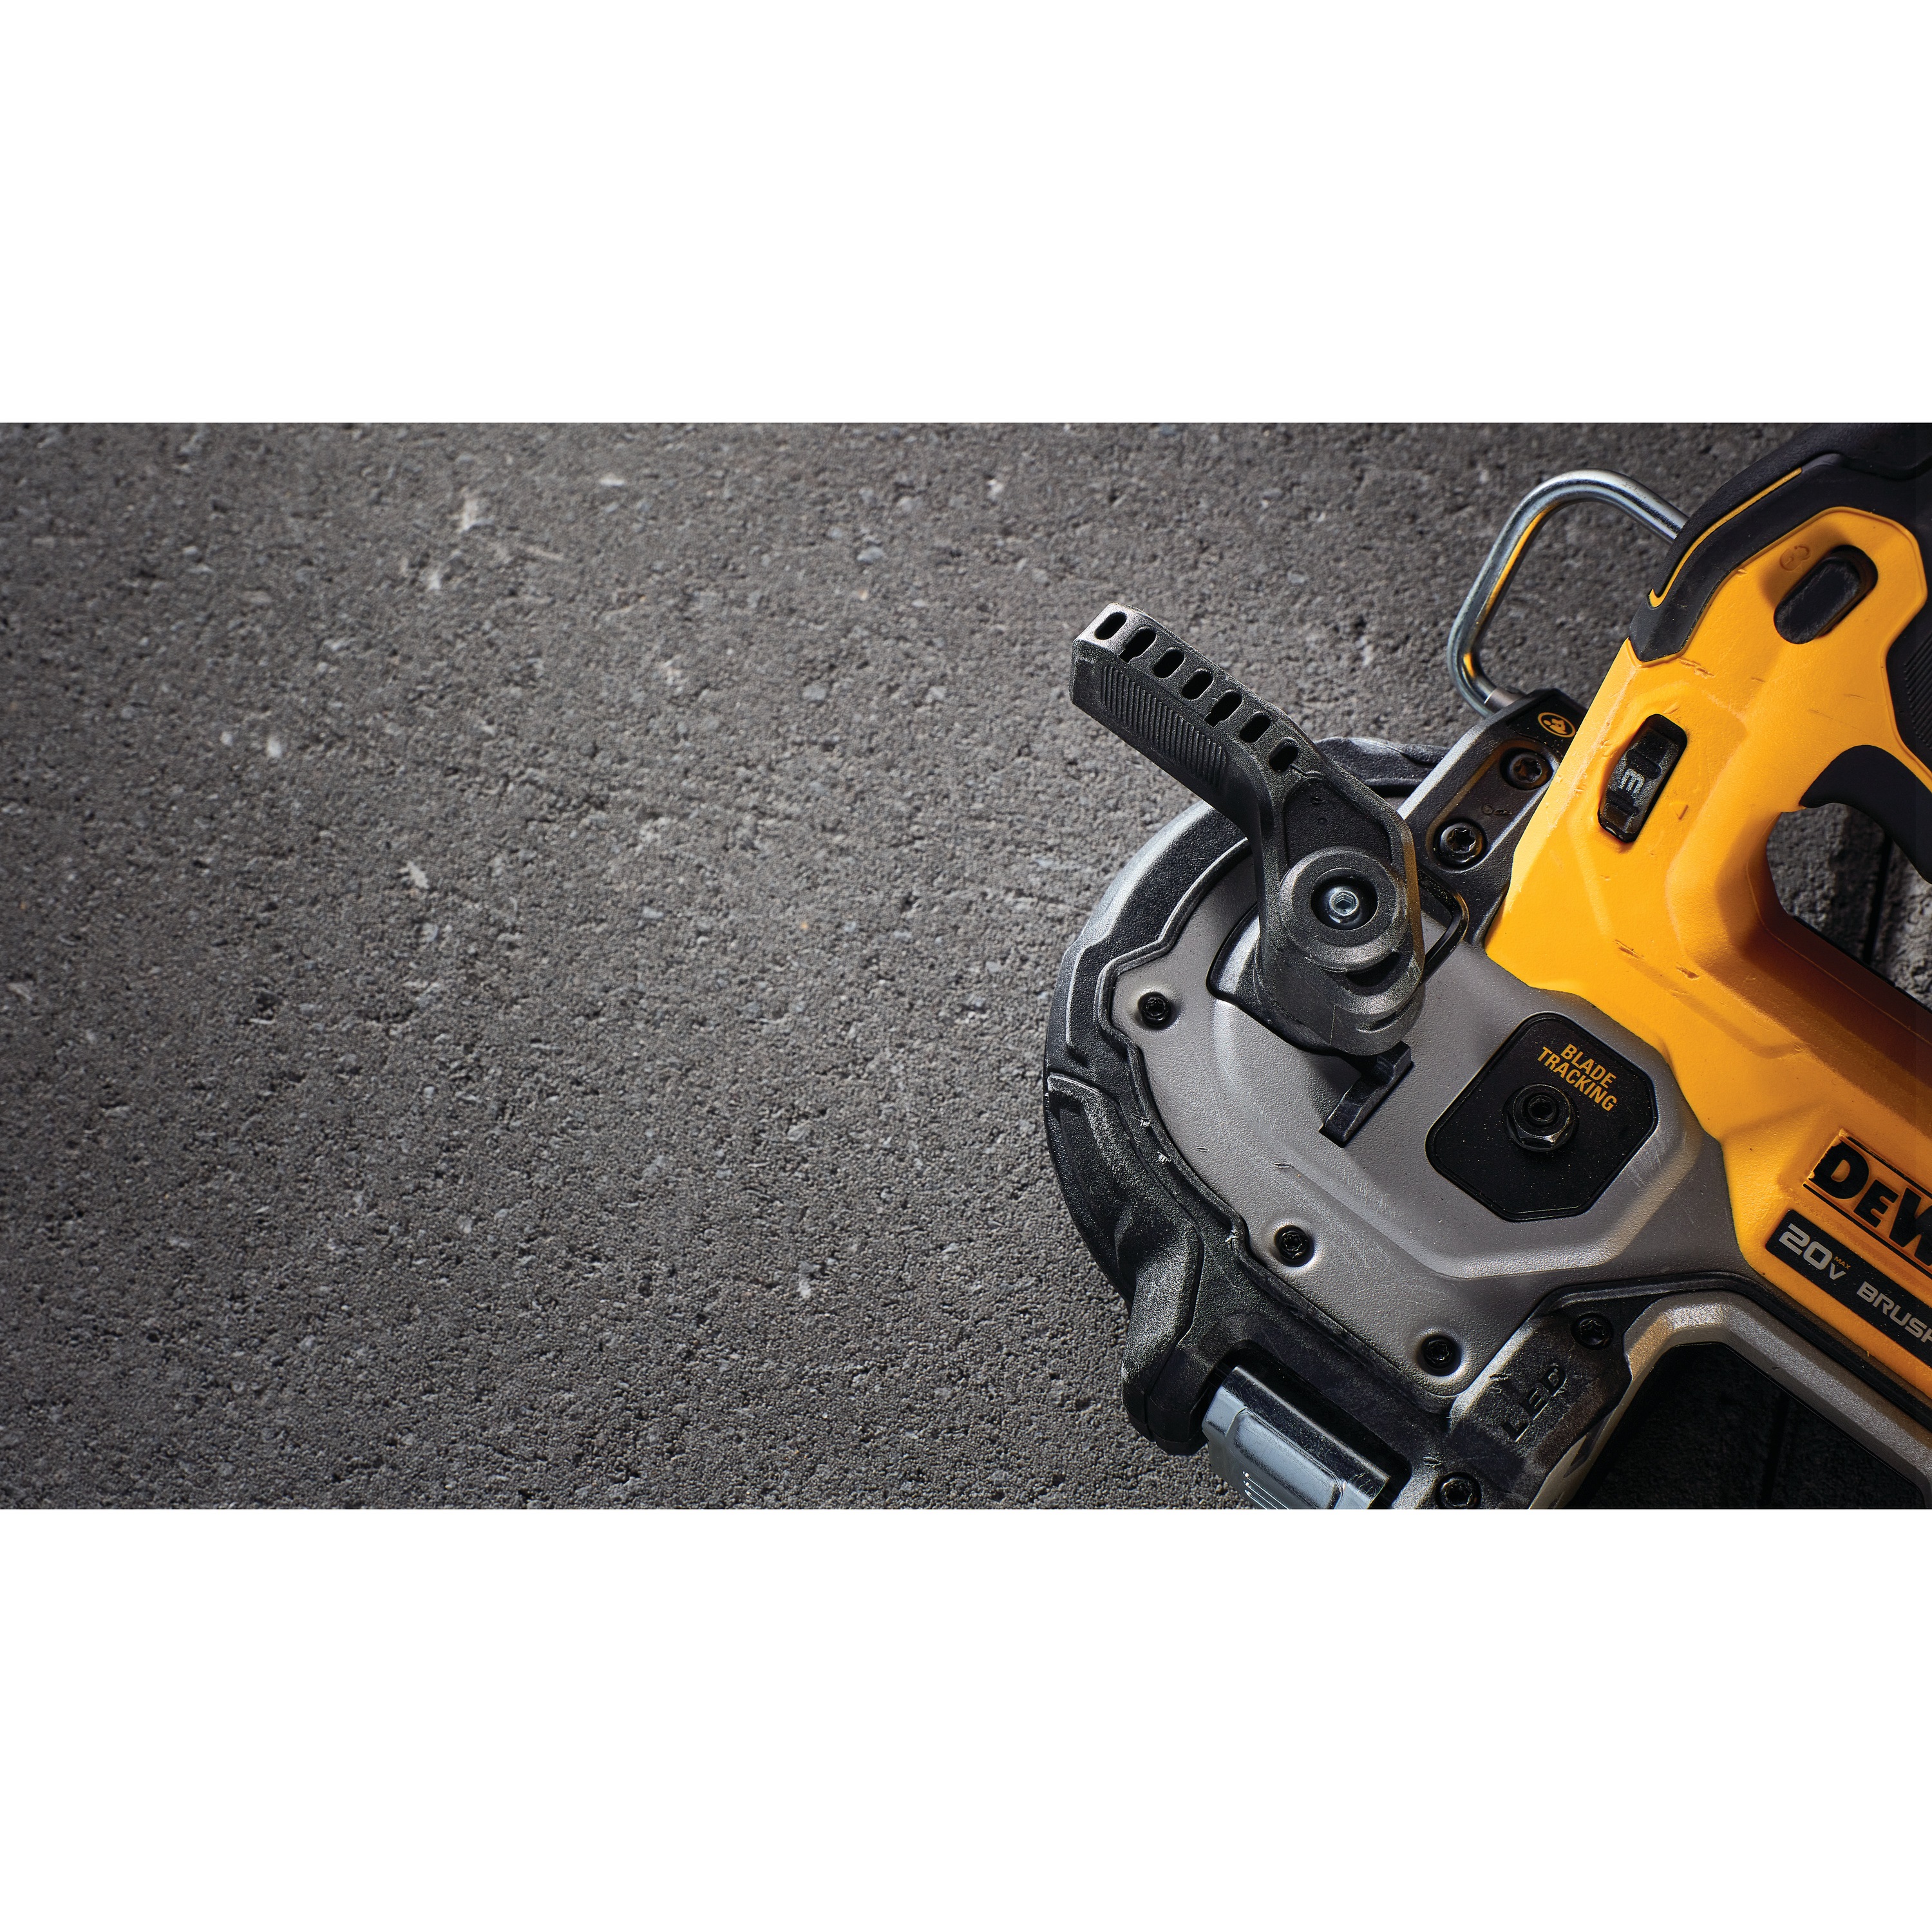 Blade release lever with wrench feature of Brushless Cordless 1 and 3 quarters inch Compact Bandsaw 